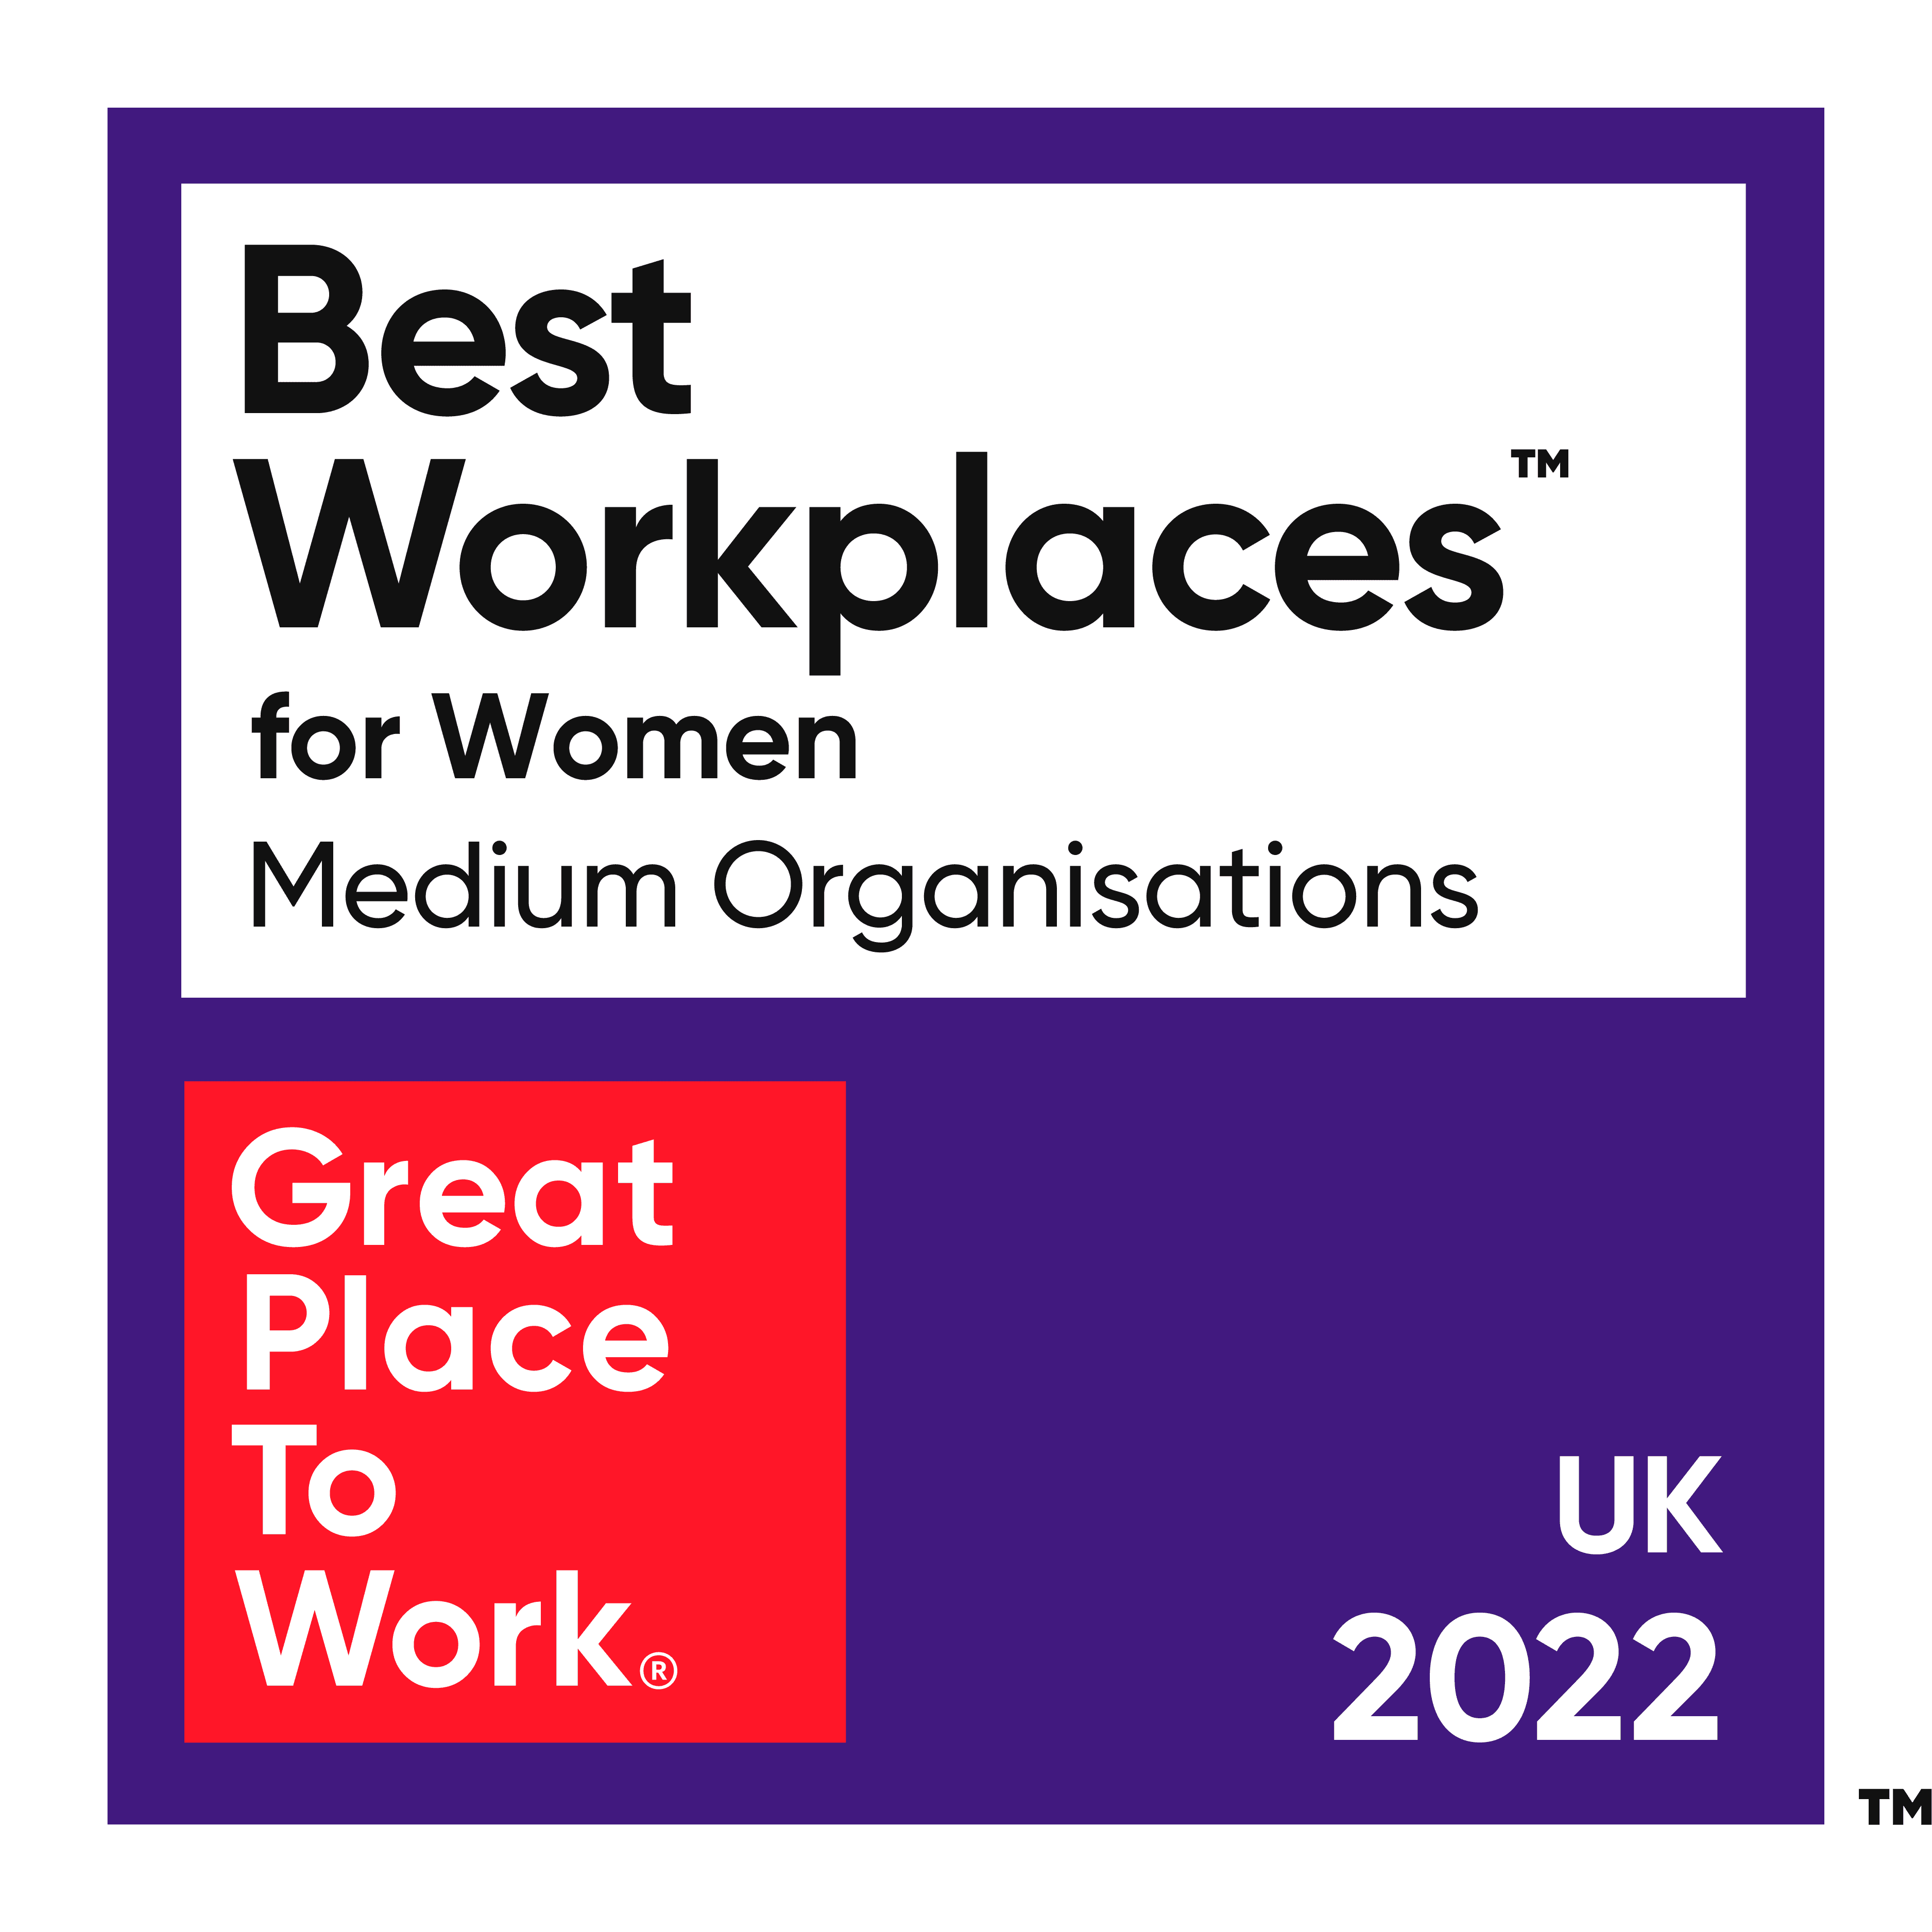 Best Workplaces for Women UK 2022